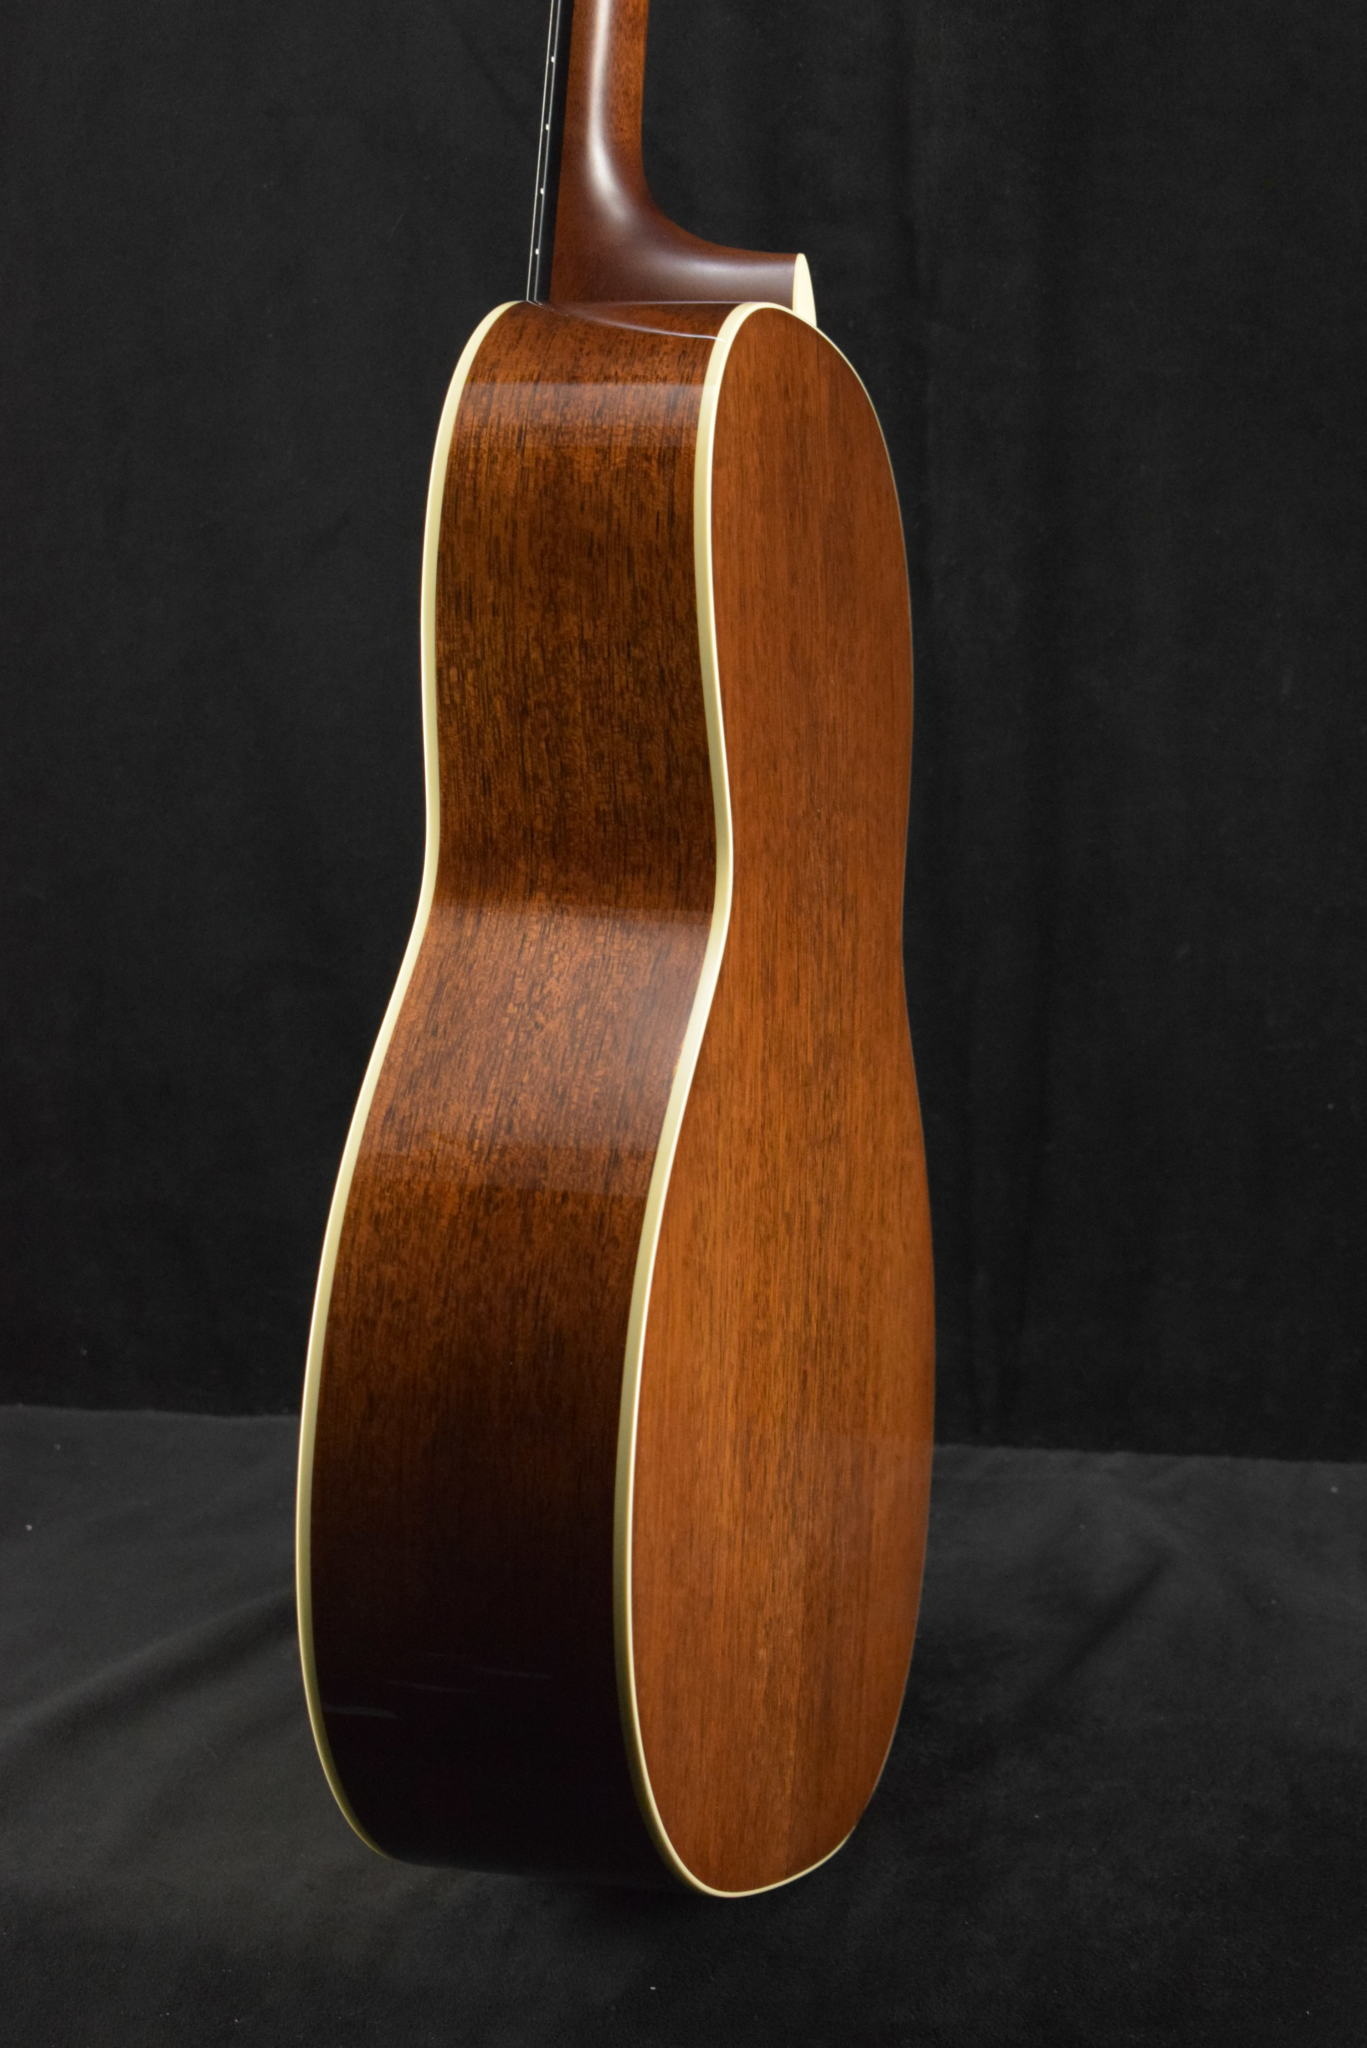 Handmade acoustic guitars – is cedar and mahogany the perfect combination?  - NK Forster Guitars